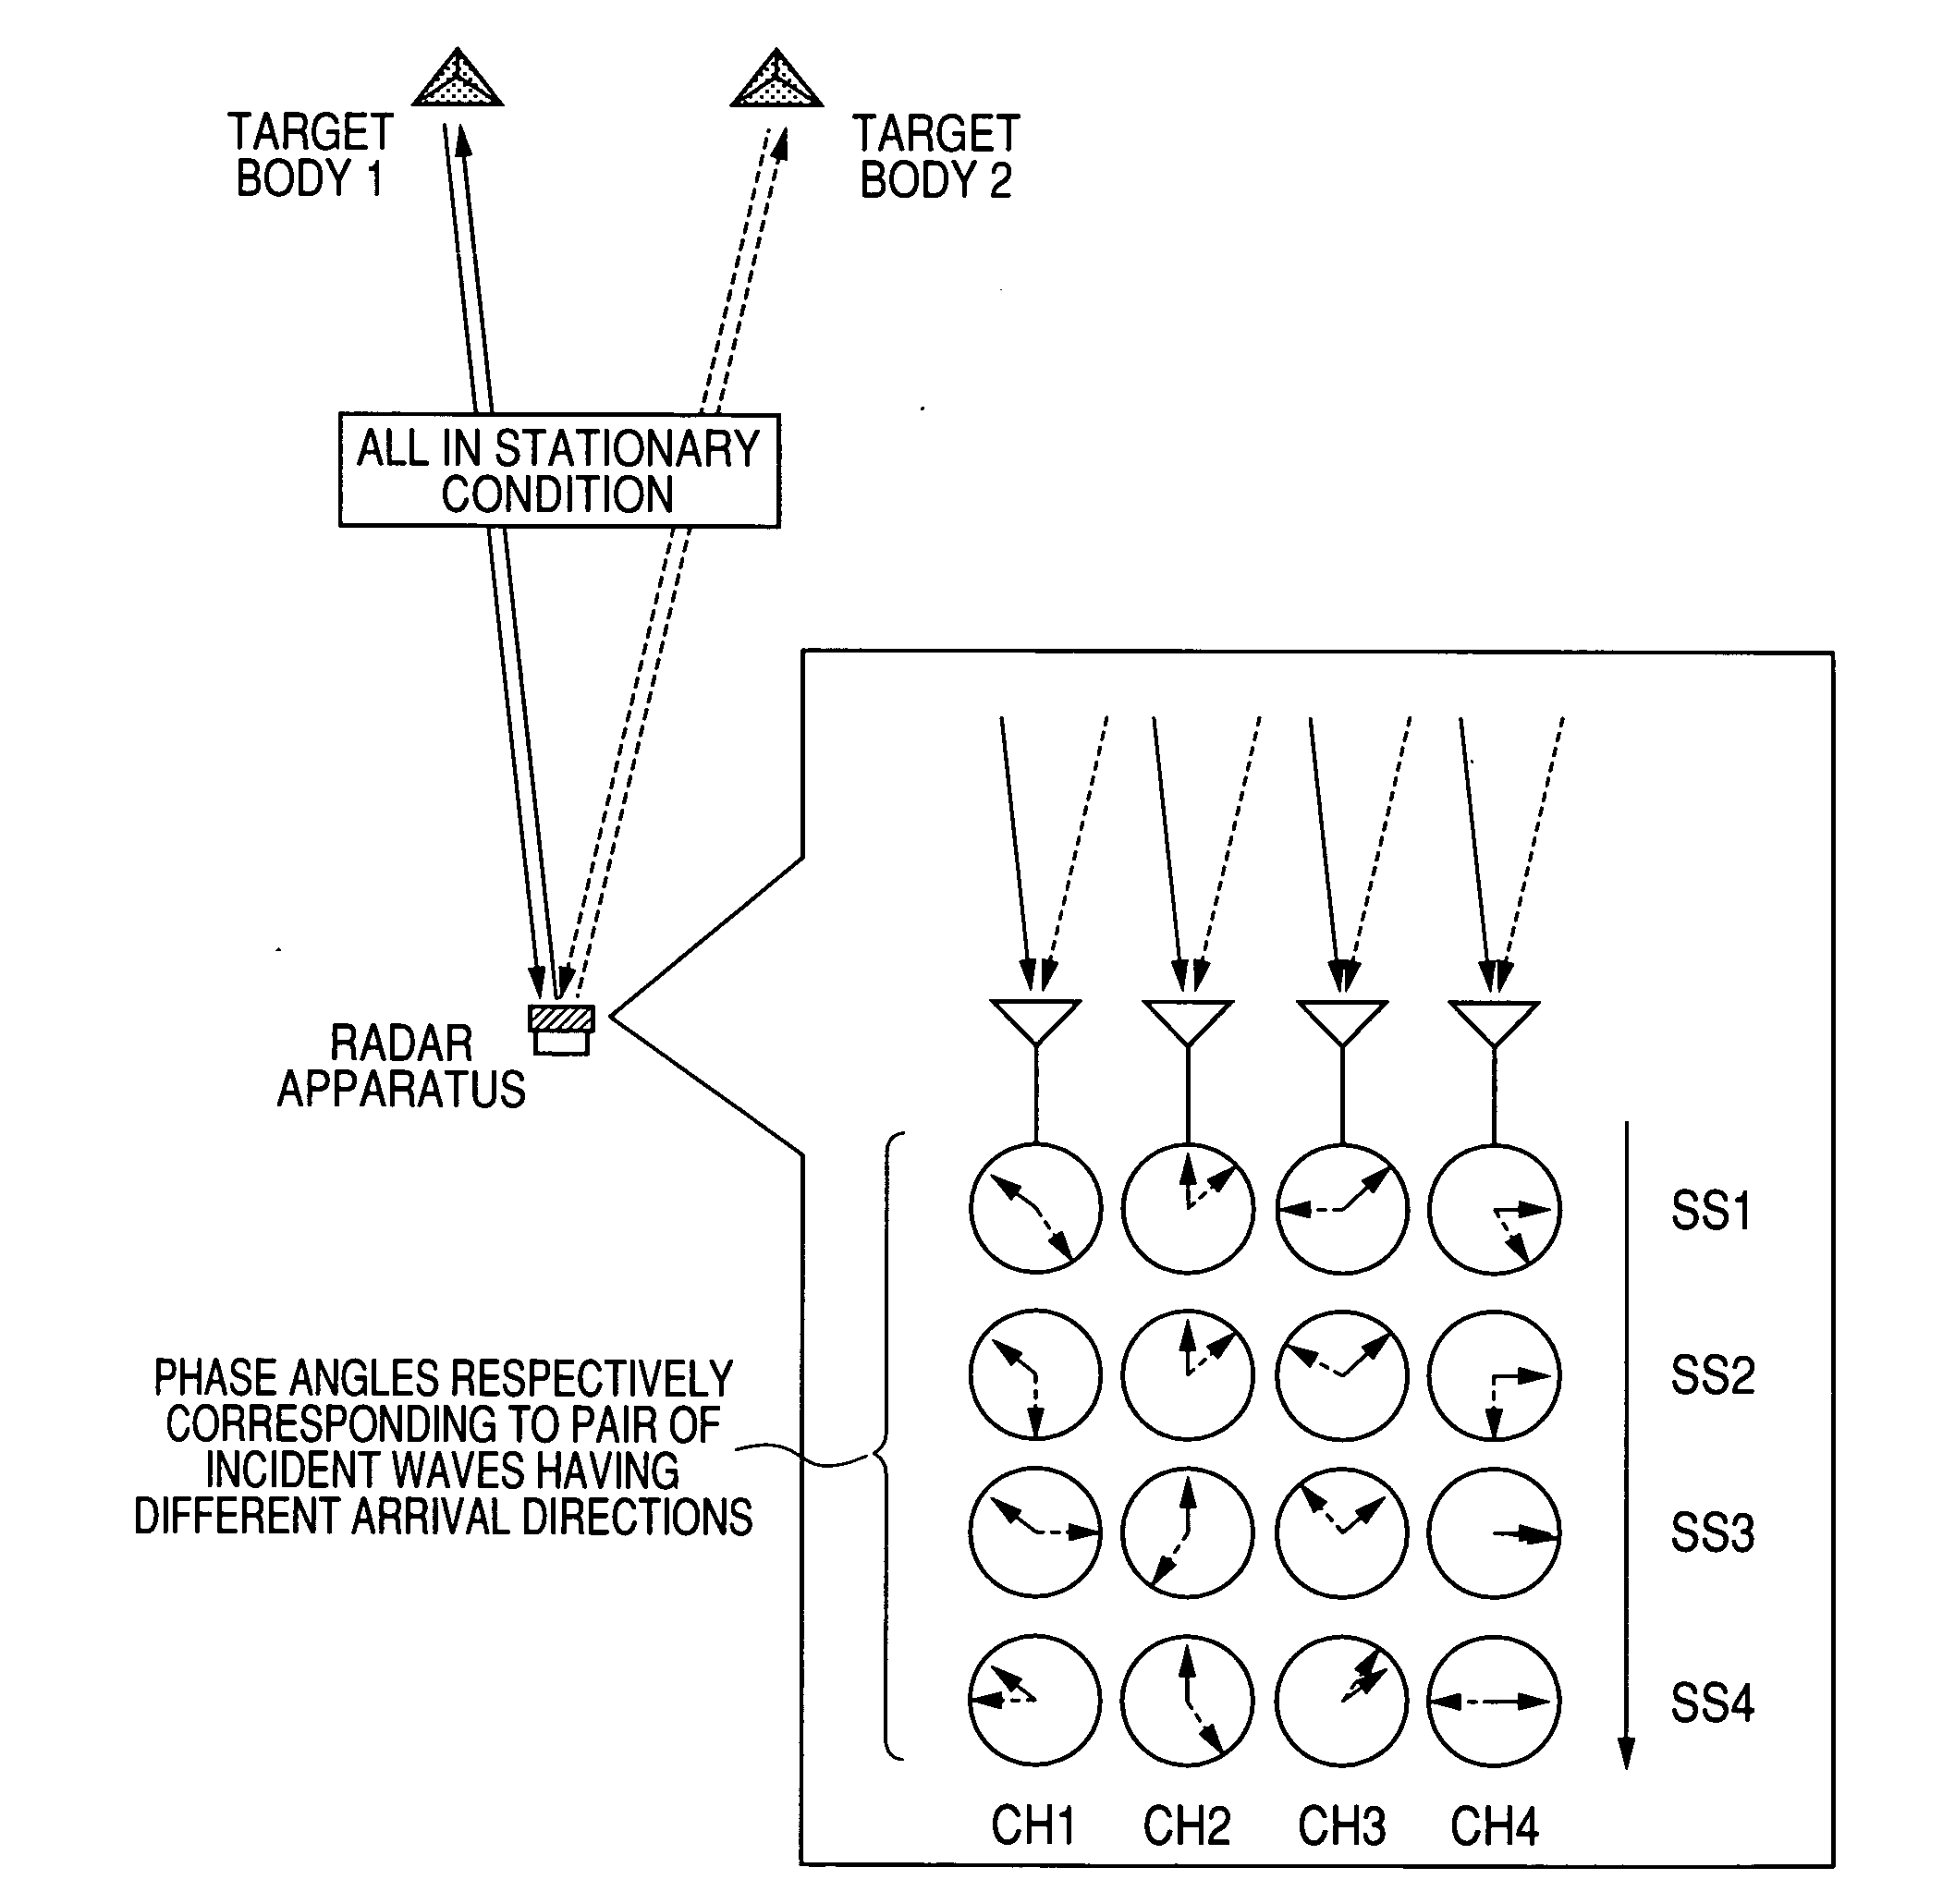 Target object detection apparatus for acquiring information concerning target objects based on correlation matrix derived from signal values corresponding to reflected electromagnetic waves